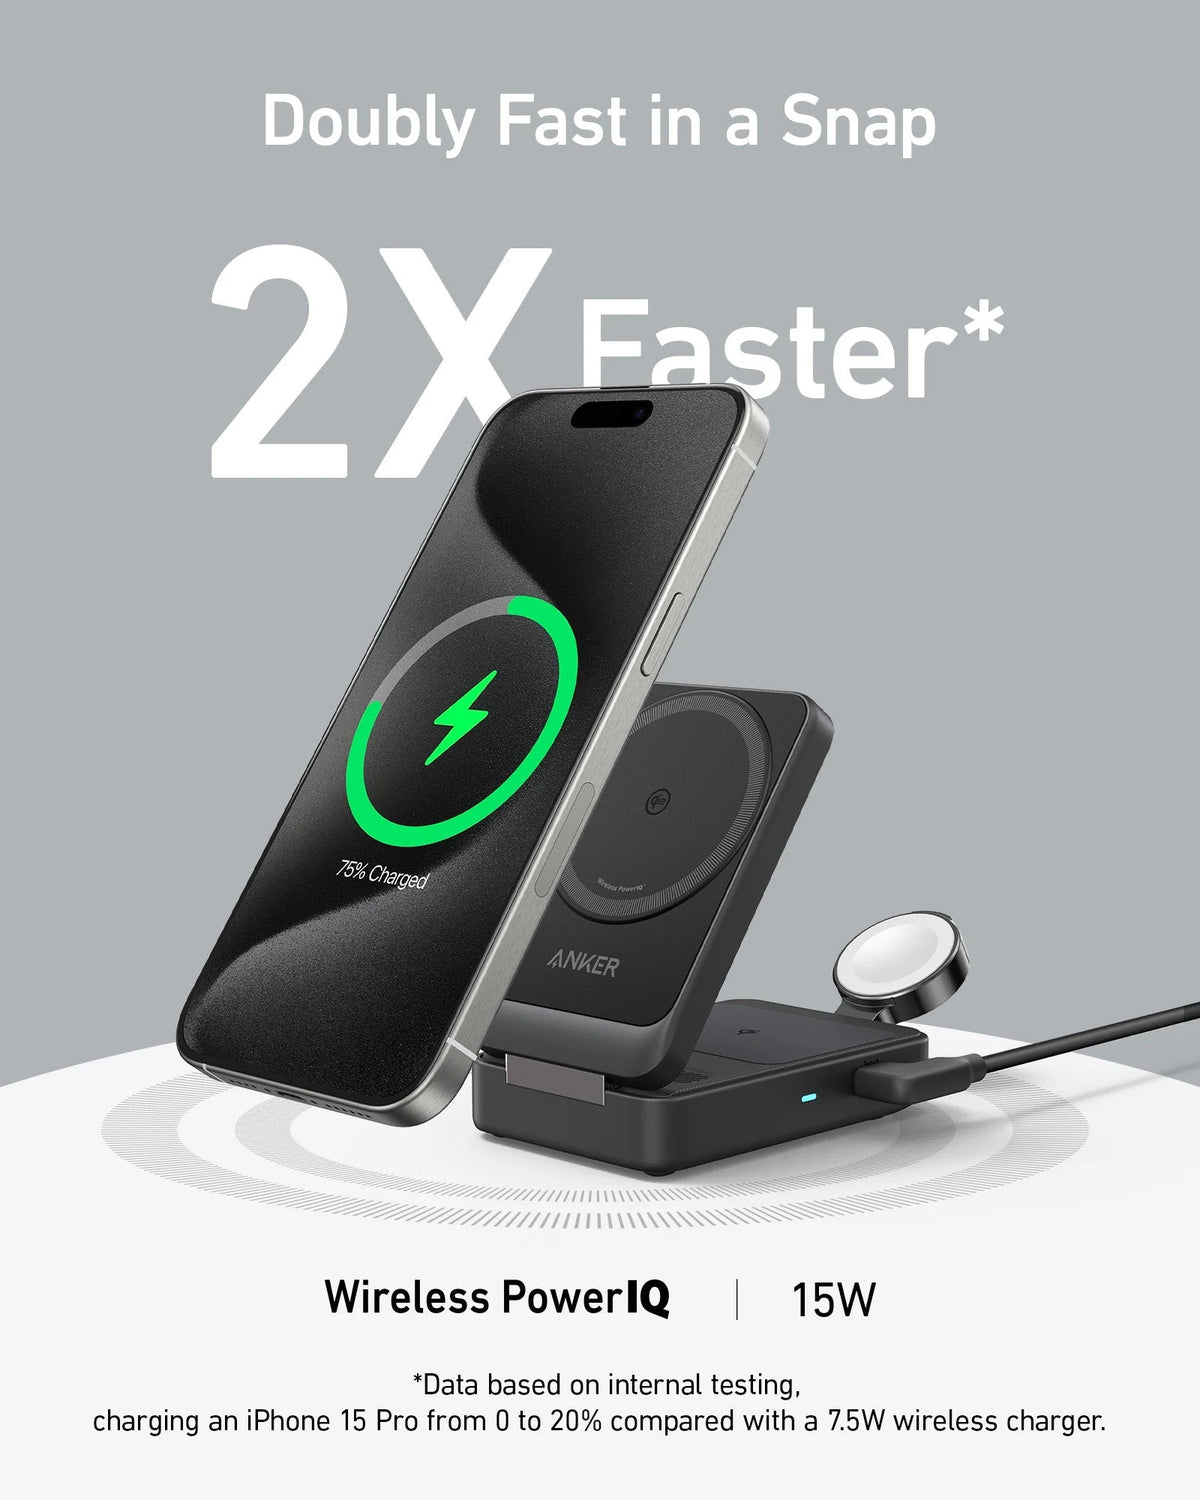 Anker MagGo Wireless Charging Station (Foldable 3-in-1)